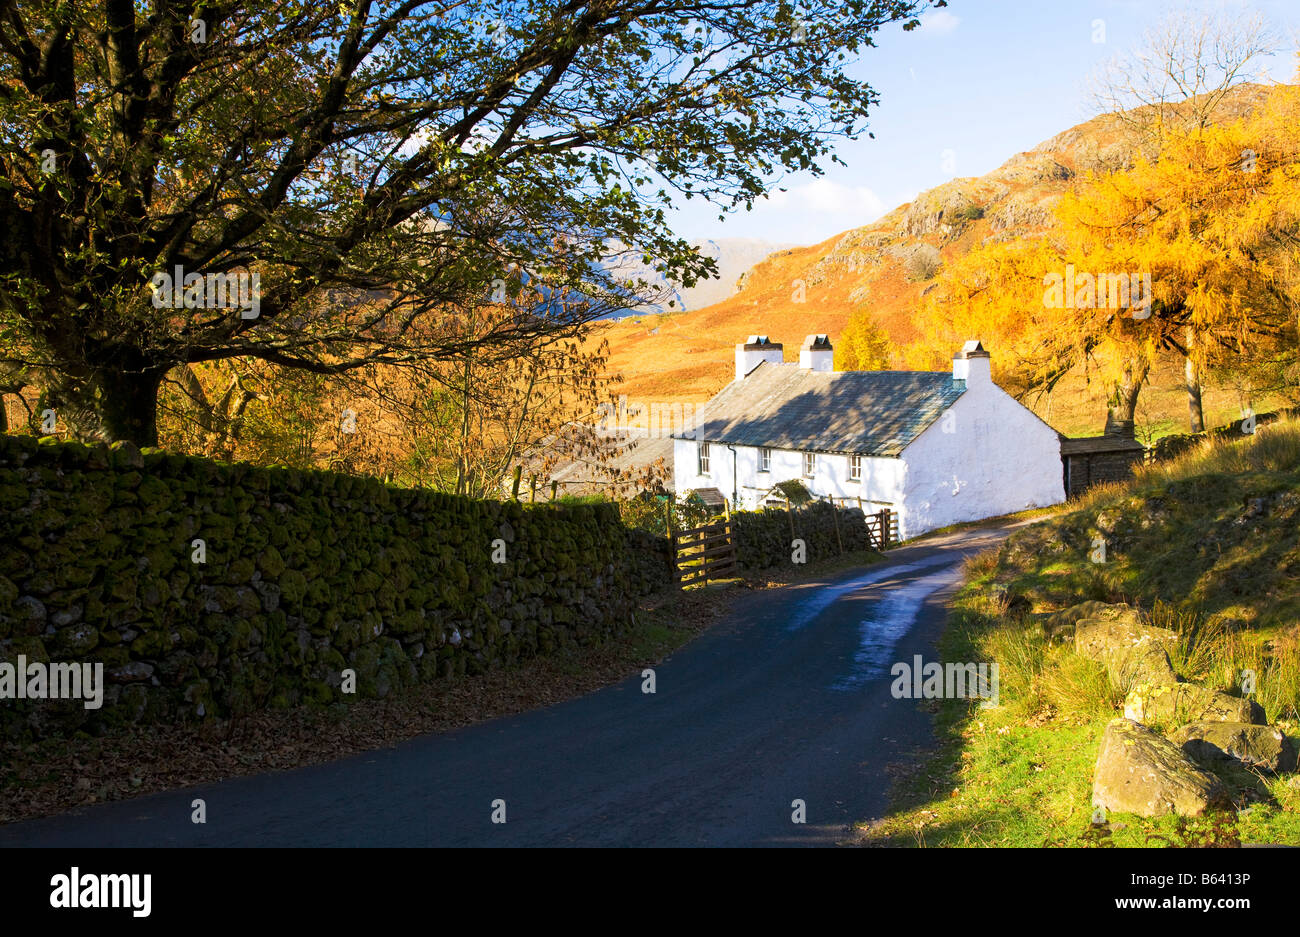 Typical whitewashed cottage farmhouse in autumn sunshine in the Lake District National Park, Cumbria, England, UK Stock Photo